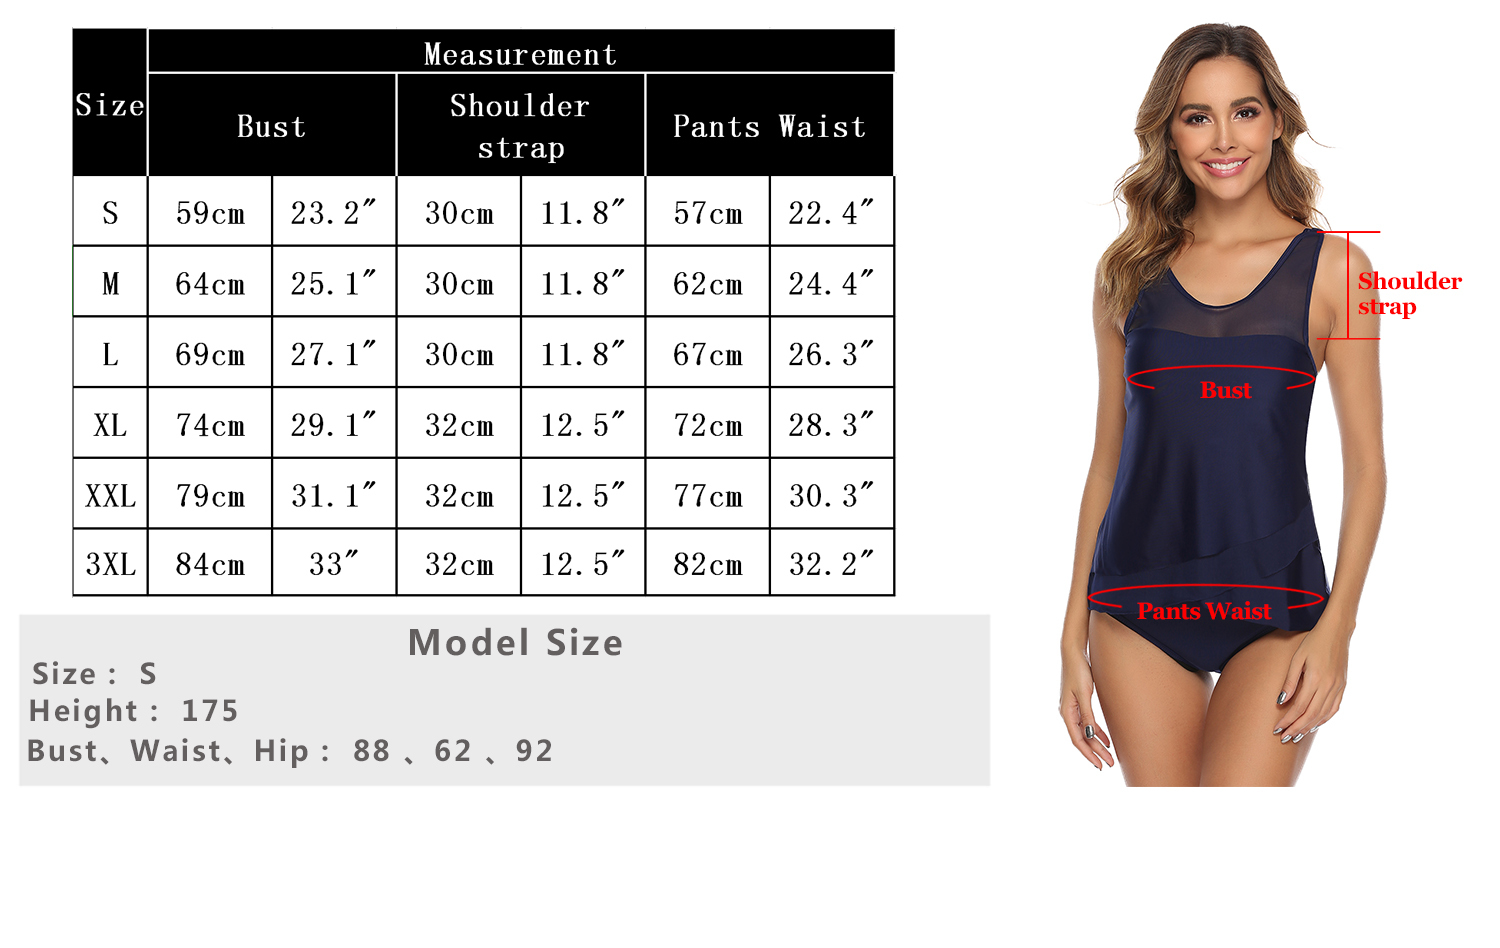 Leisure Integration Travel Vacationcasual Ladies One-Piece Swimsuit